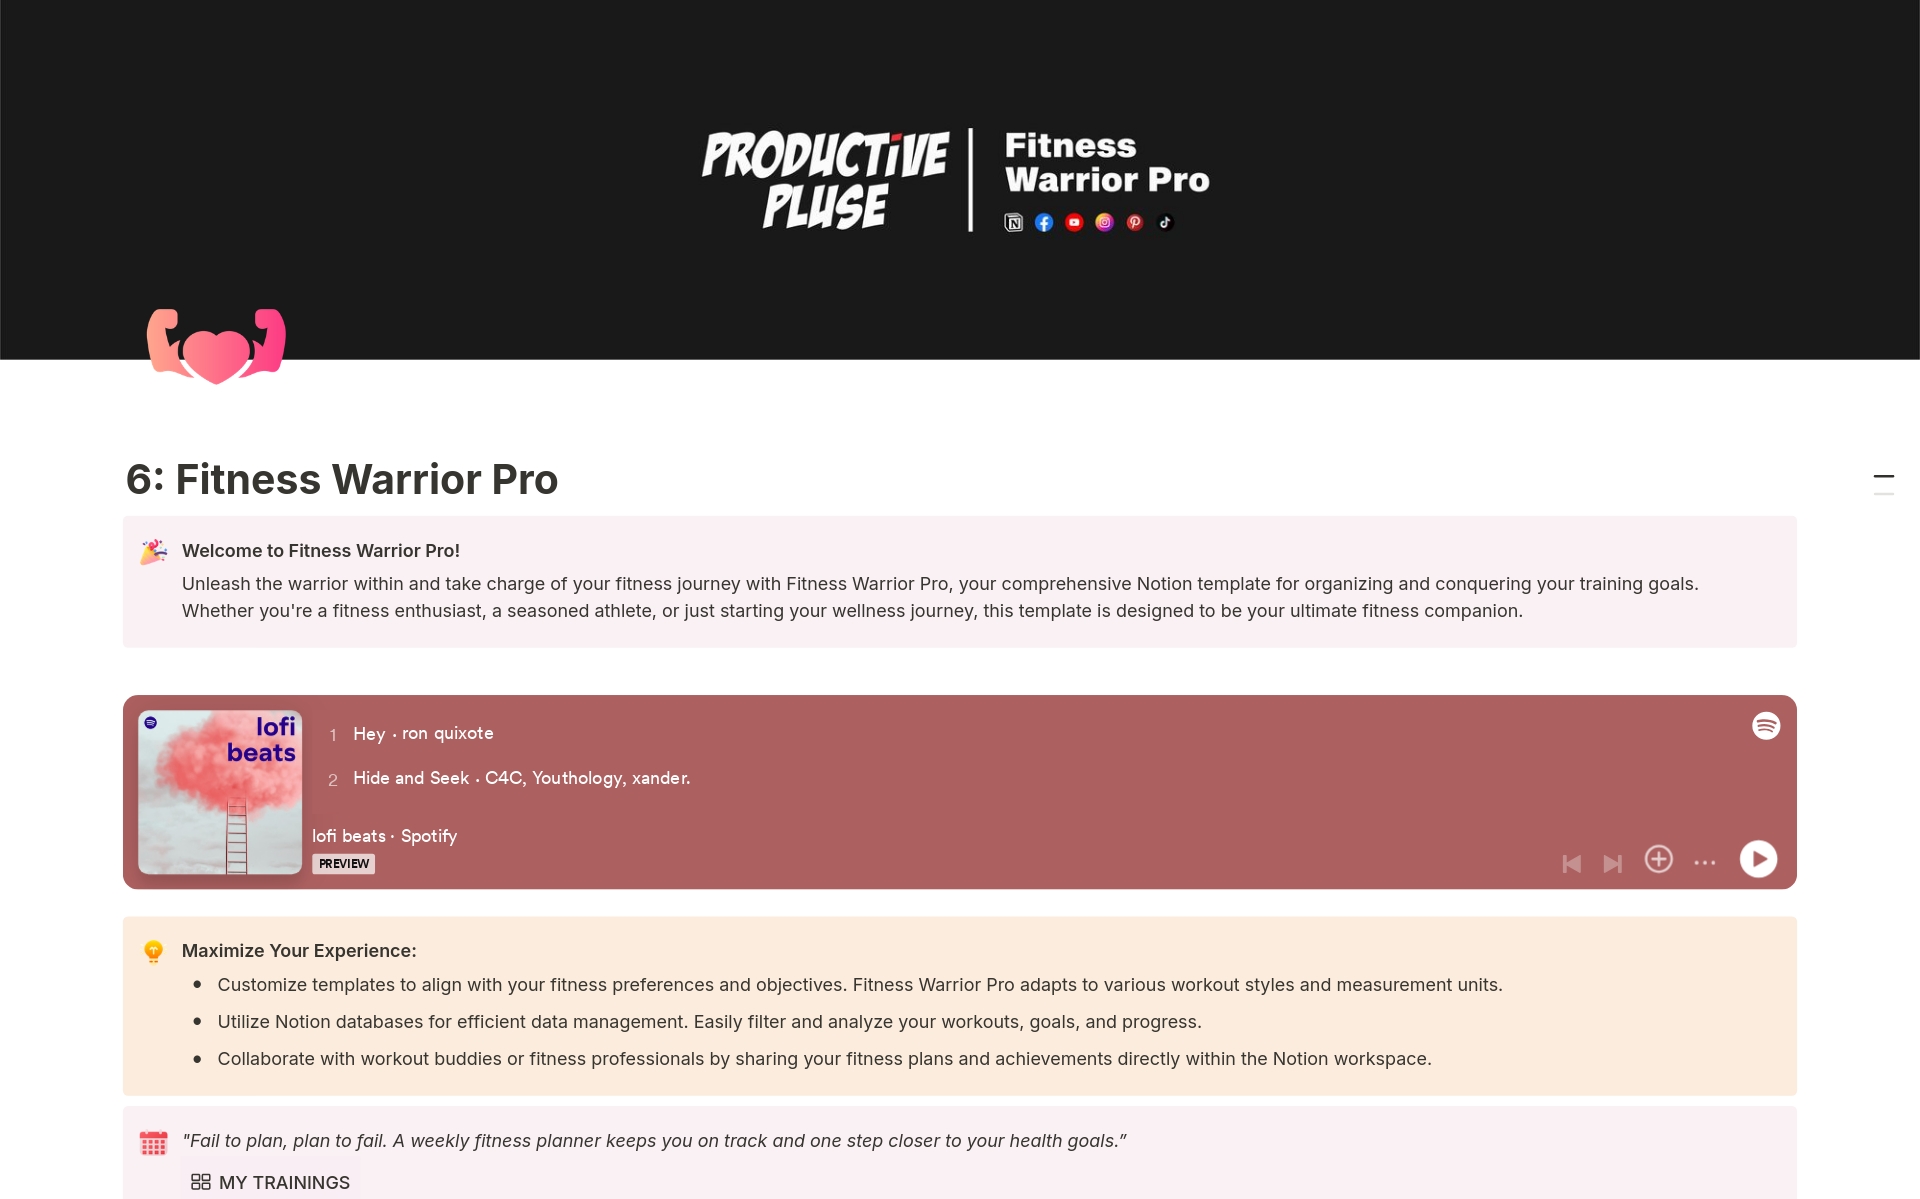 Fitness Warrior Pro, your comprehensive Notion template for organizing and conquering your training goals. Whether you're a fitness enthusiast, a seasoned athlete, or just starting your wellness journey, this template is designed to be your ultimate fitness companion.